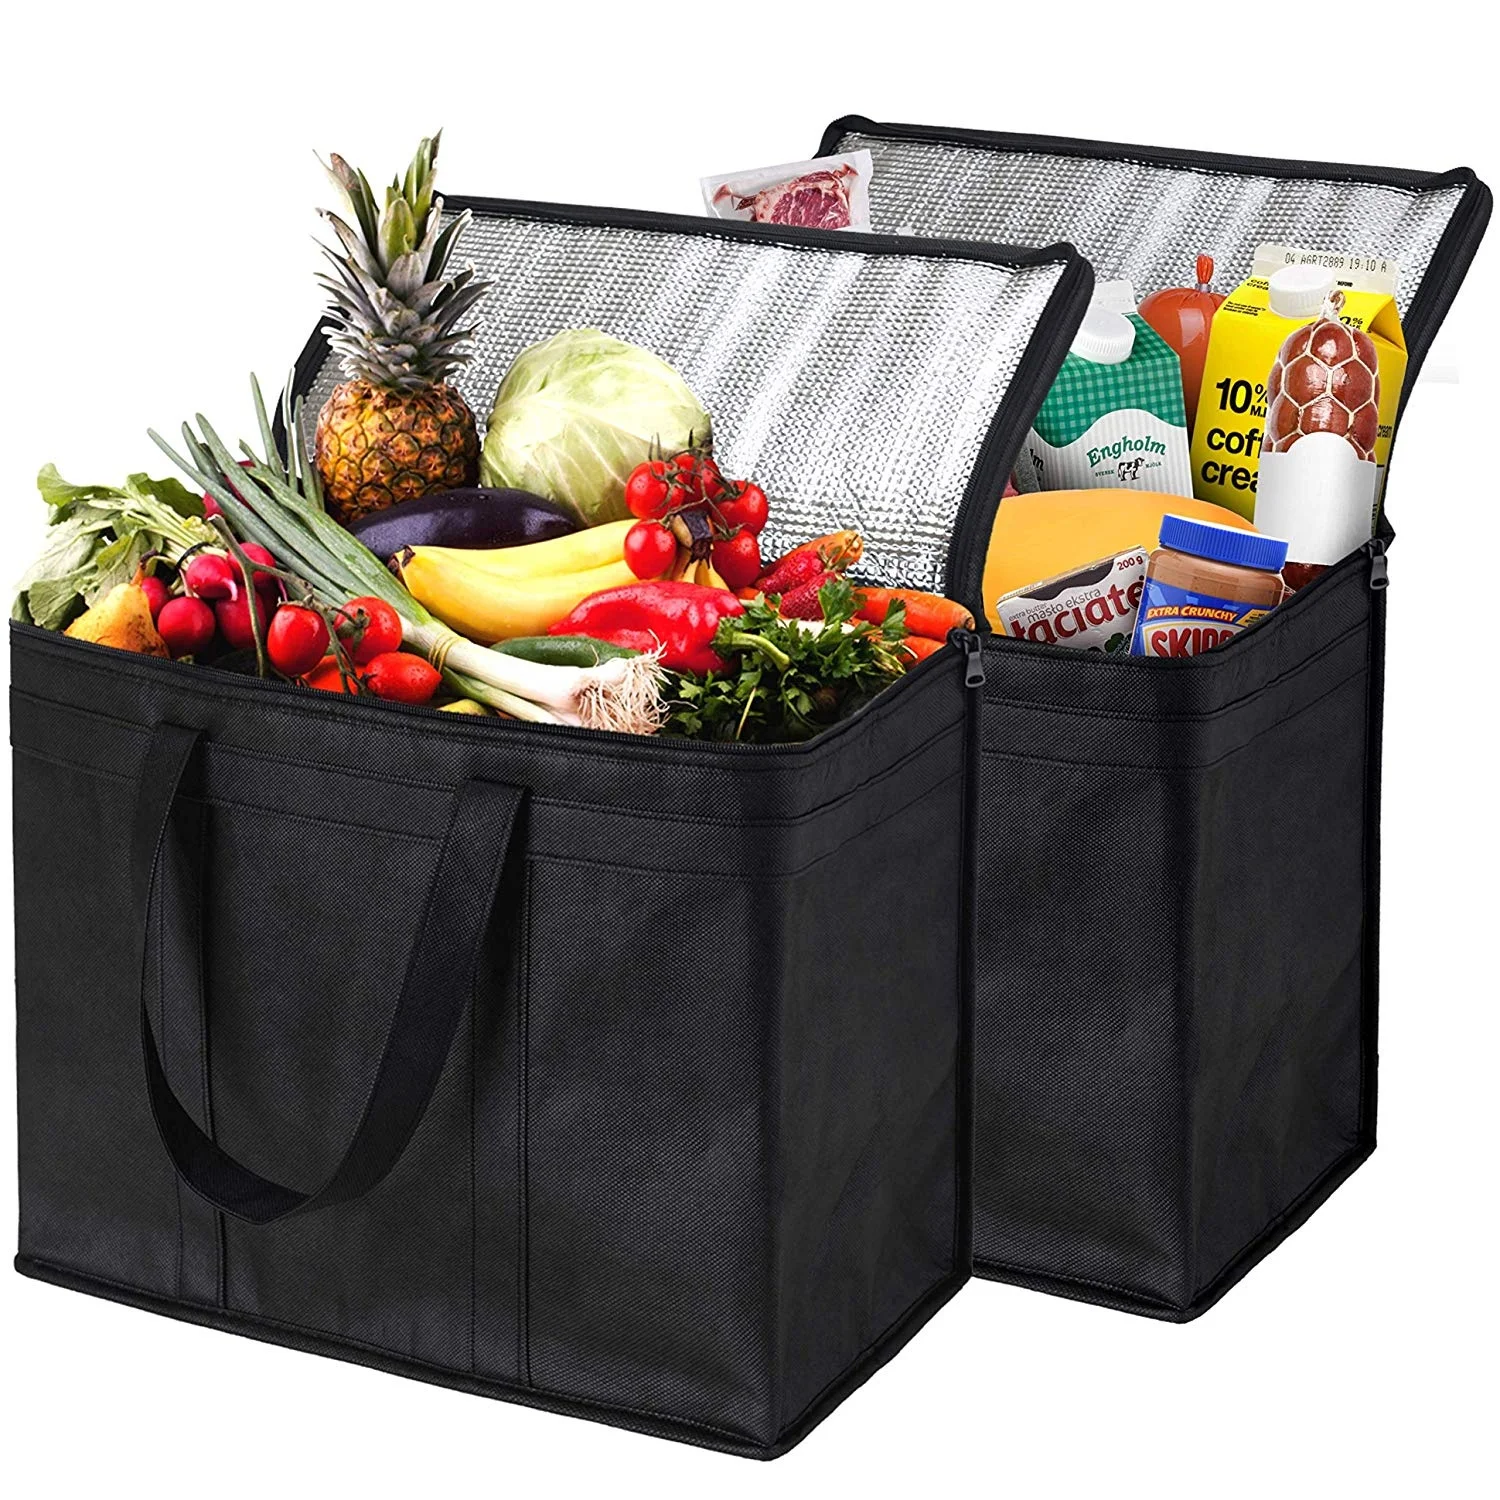 

Shopping Large Aluminum Foil Grocery Bag Reusable Insulated, 50 different colors